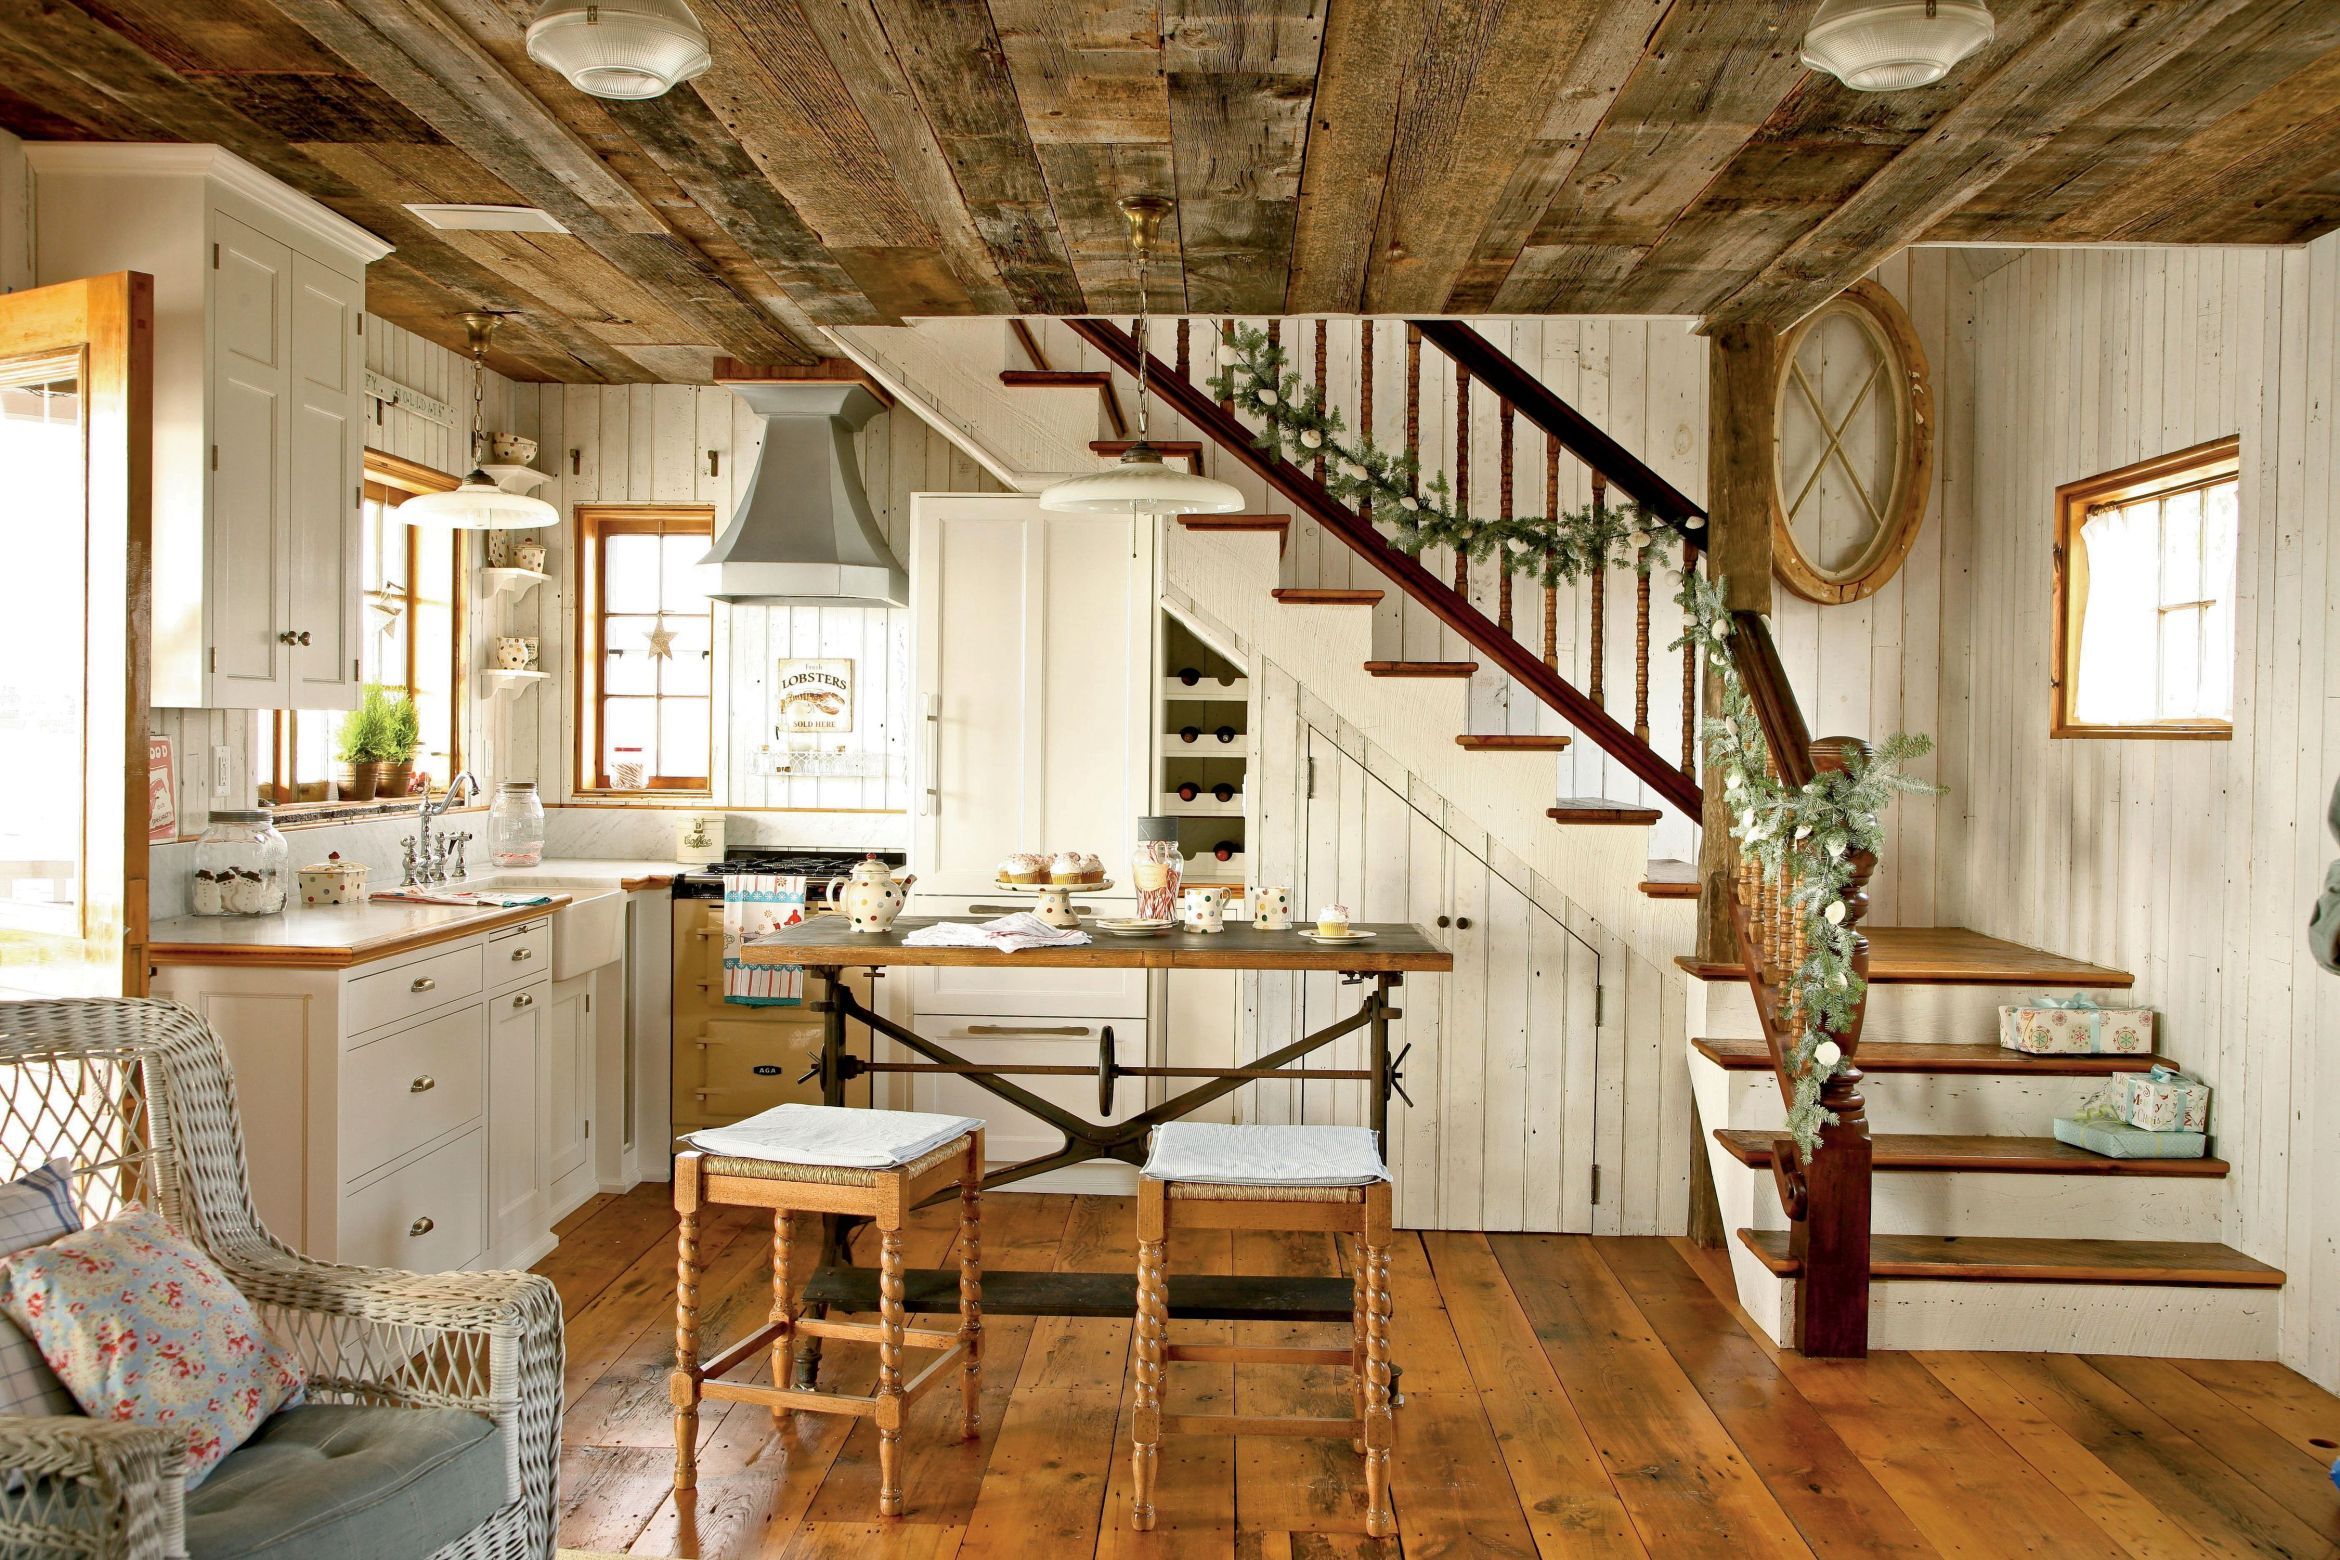 Rustic Retreats: The Charm Of Wood In Cottage Interiors